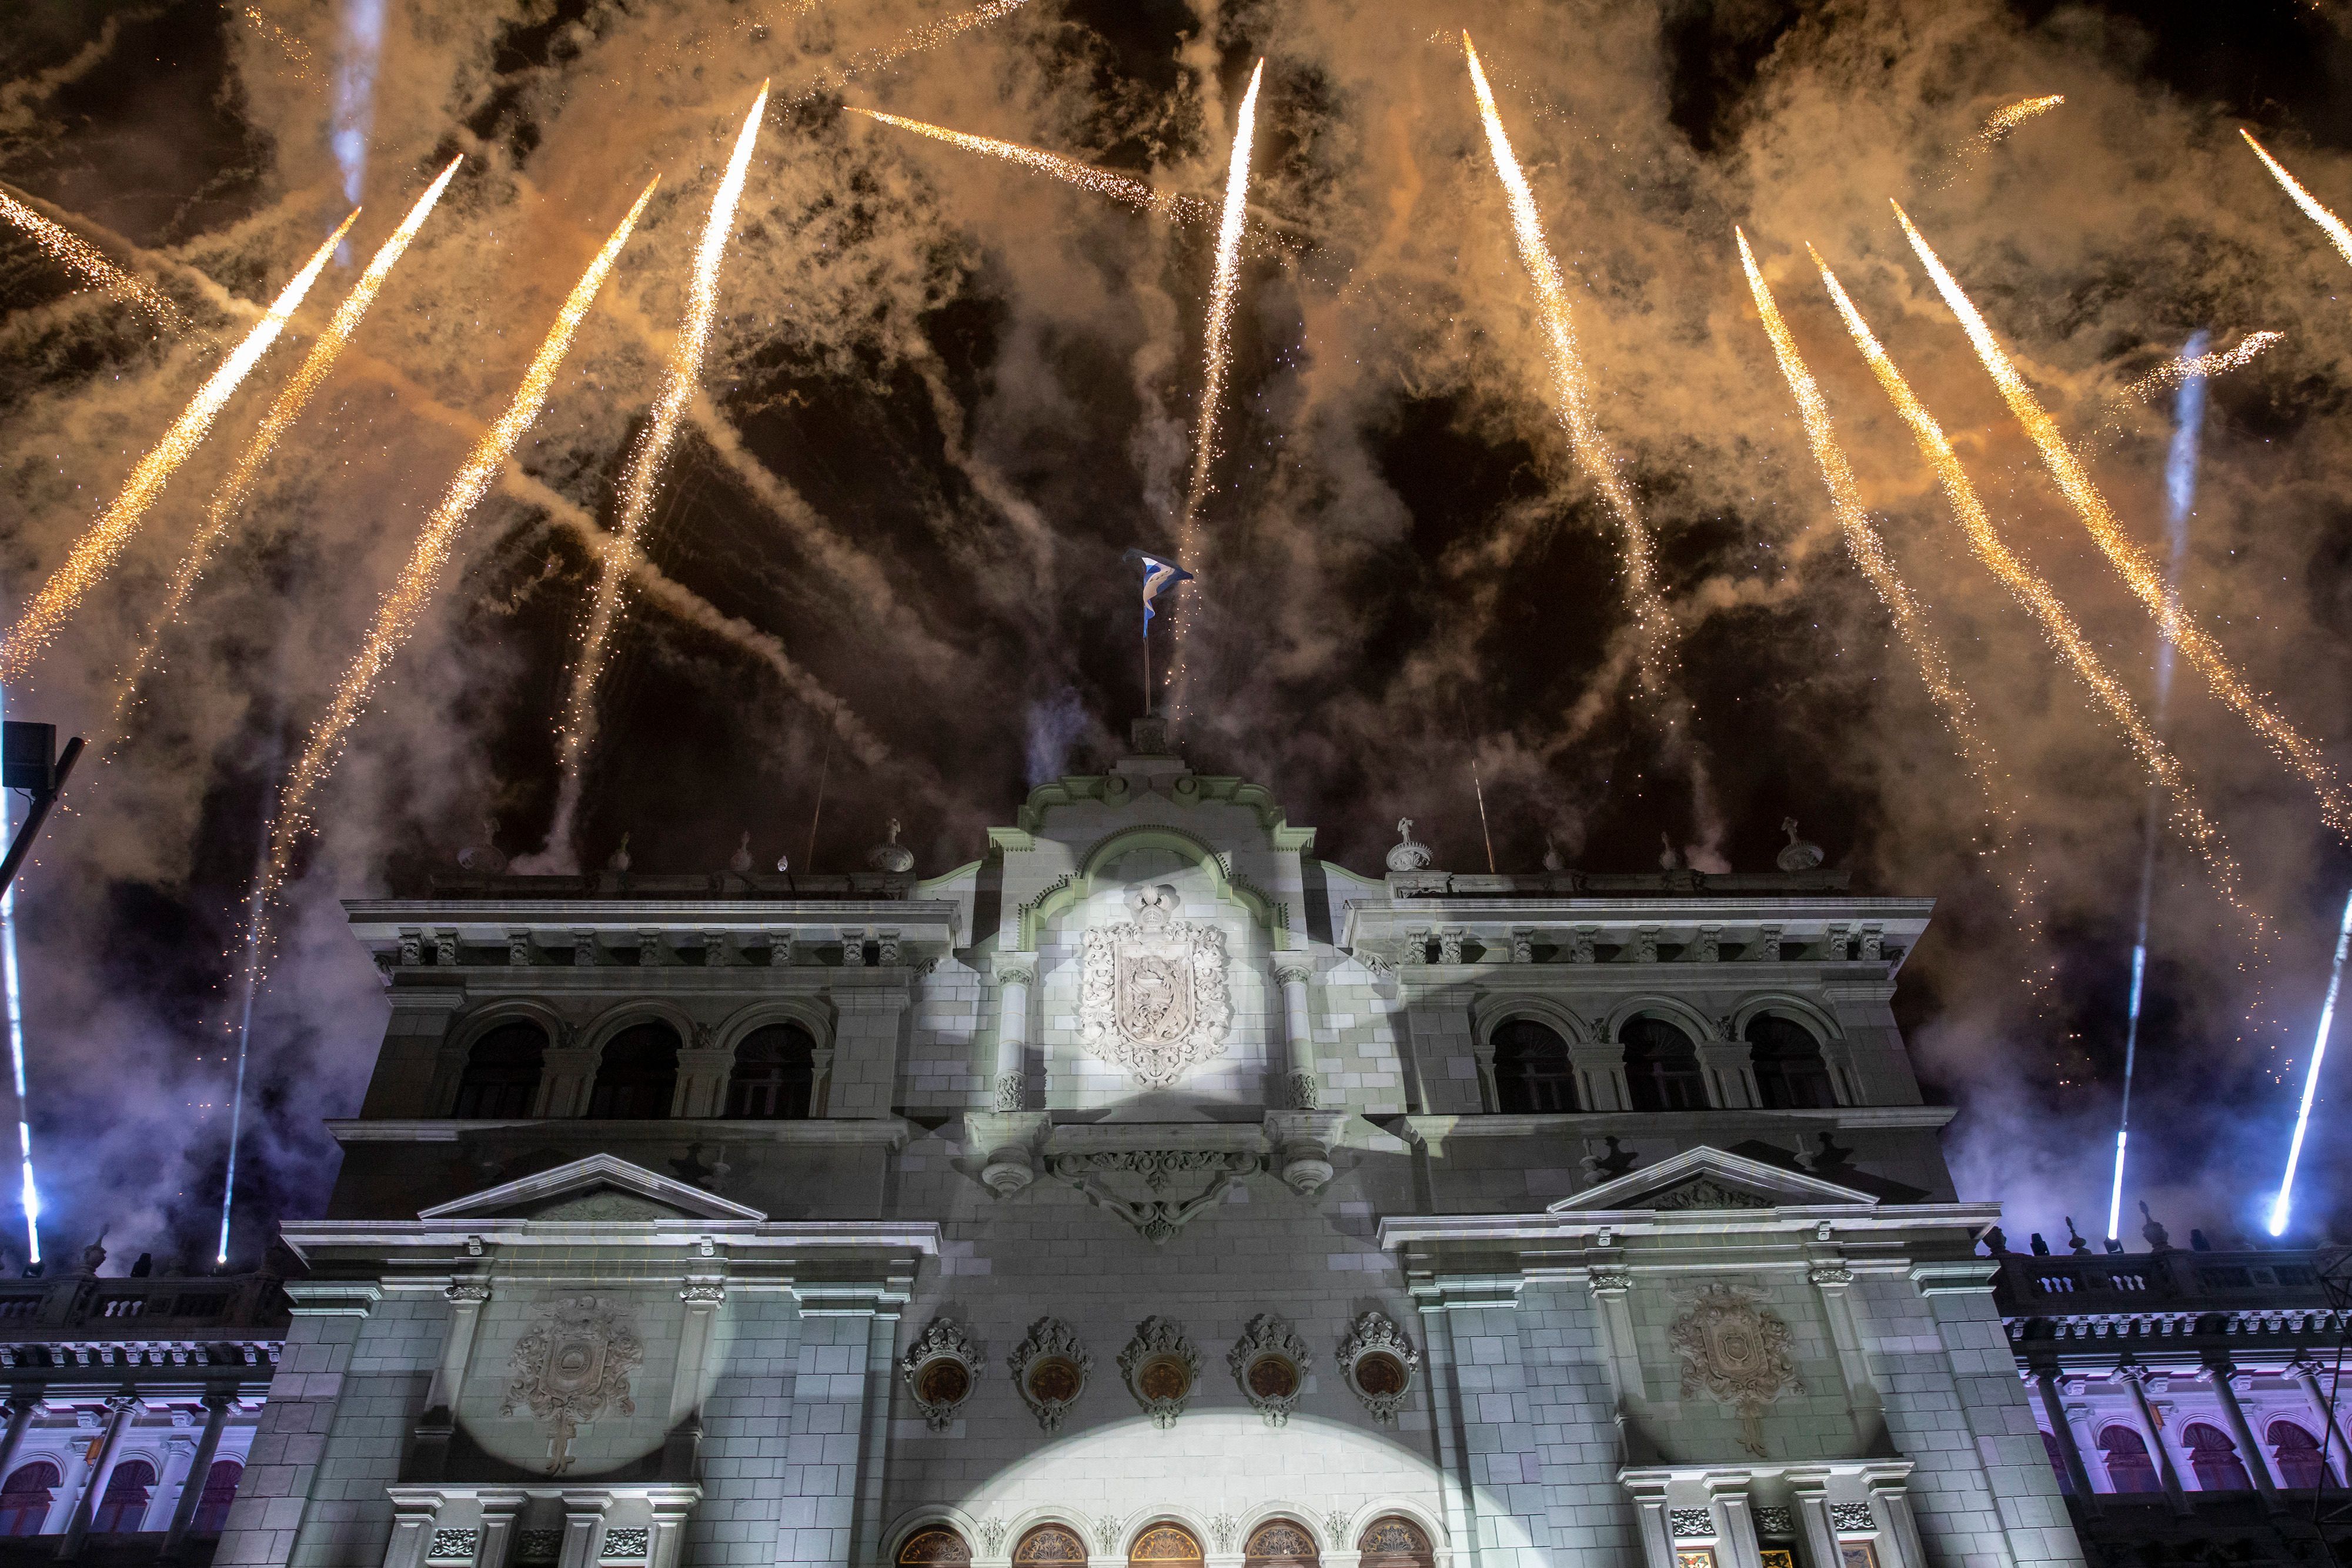 Fireworks are seen in the nighttime sky behind Guatemala's National Palace, which is a white old building with several stories